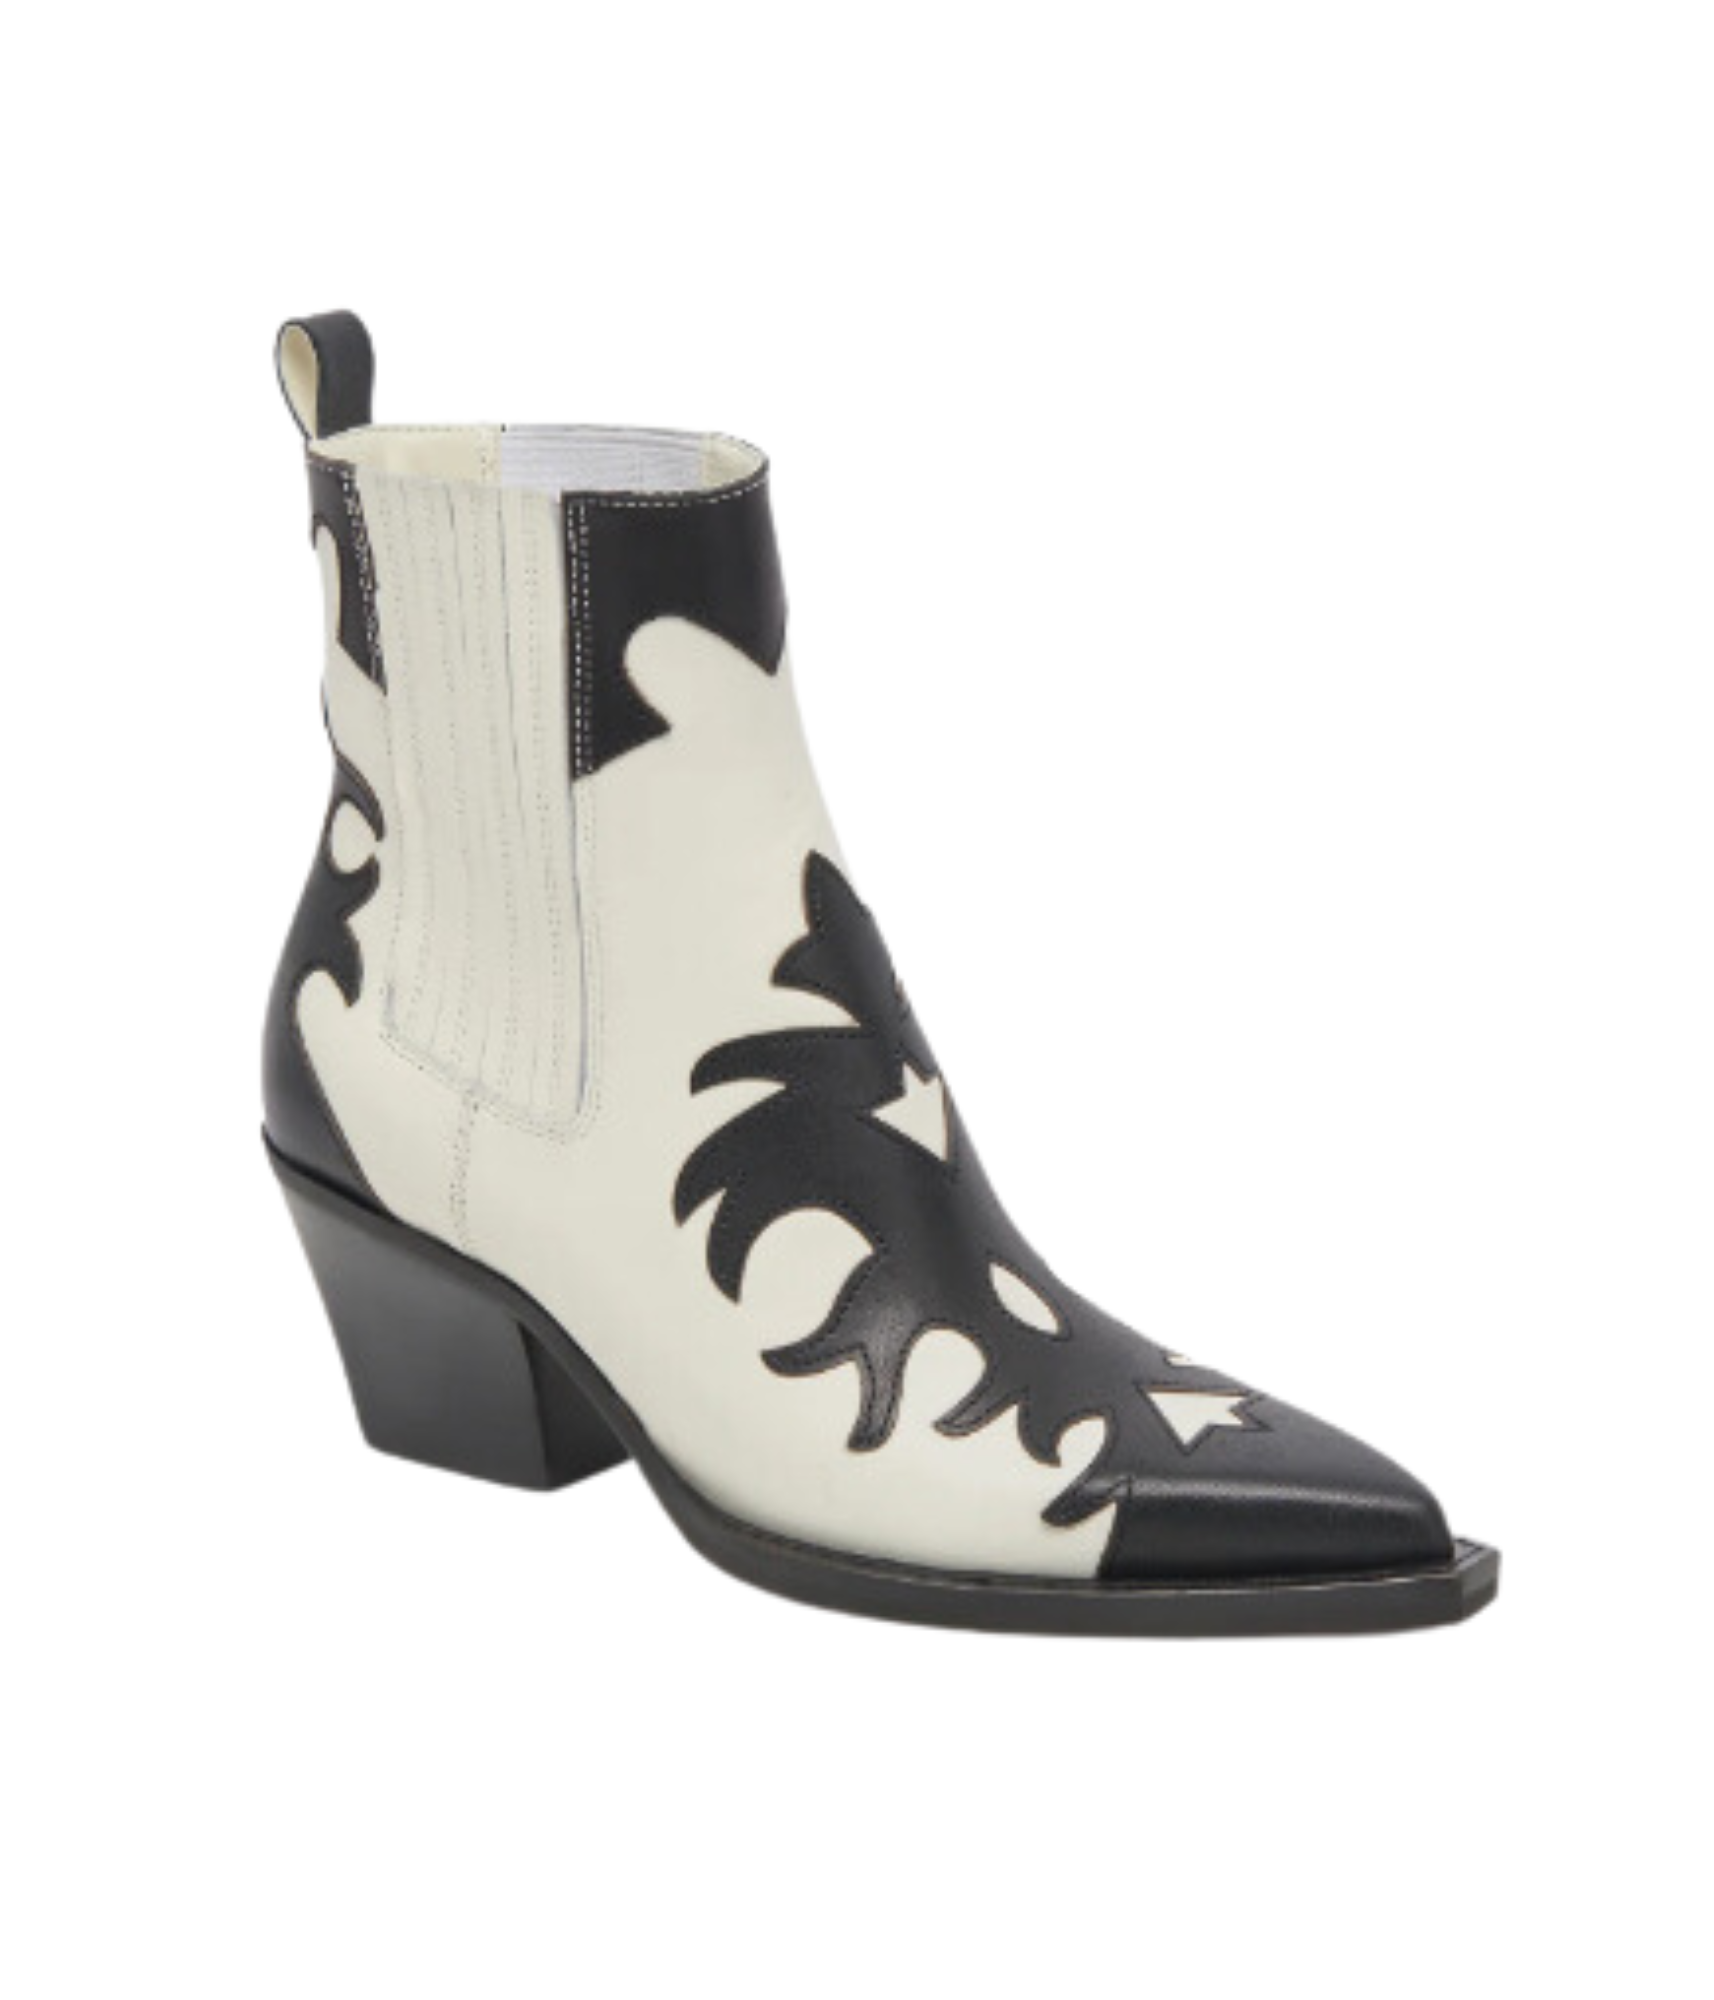 Renia Ankle Boots in Black and White